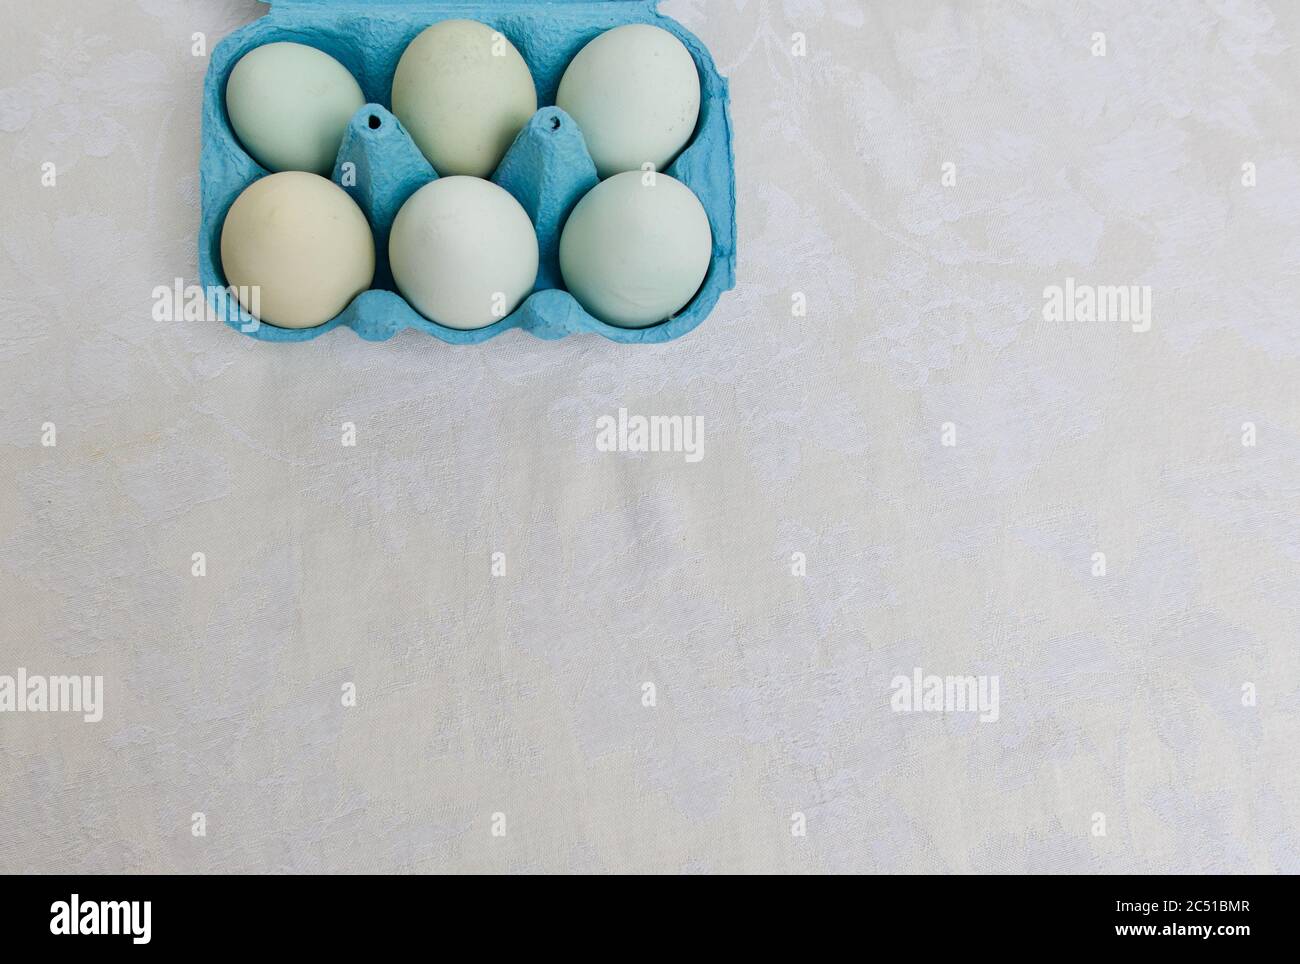 Six soft blue hens eggs in blue carton on white background Stock Photo